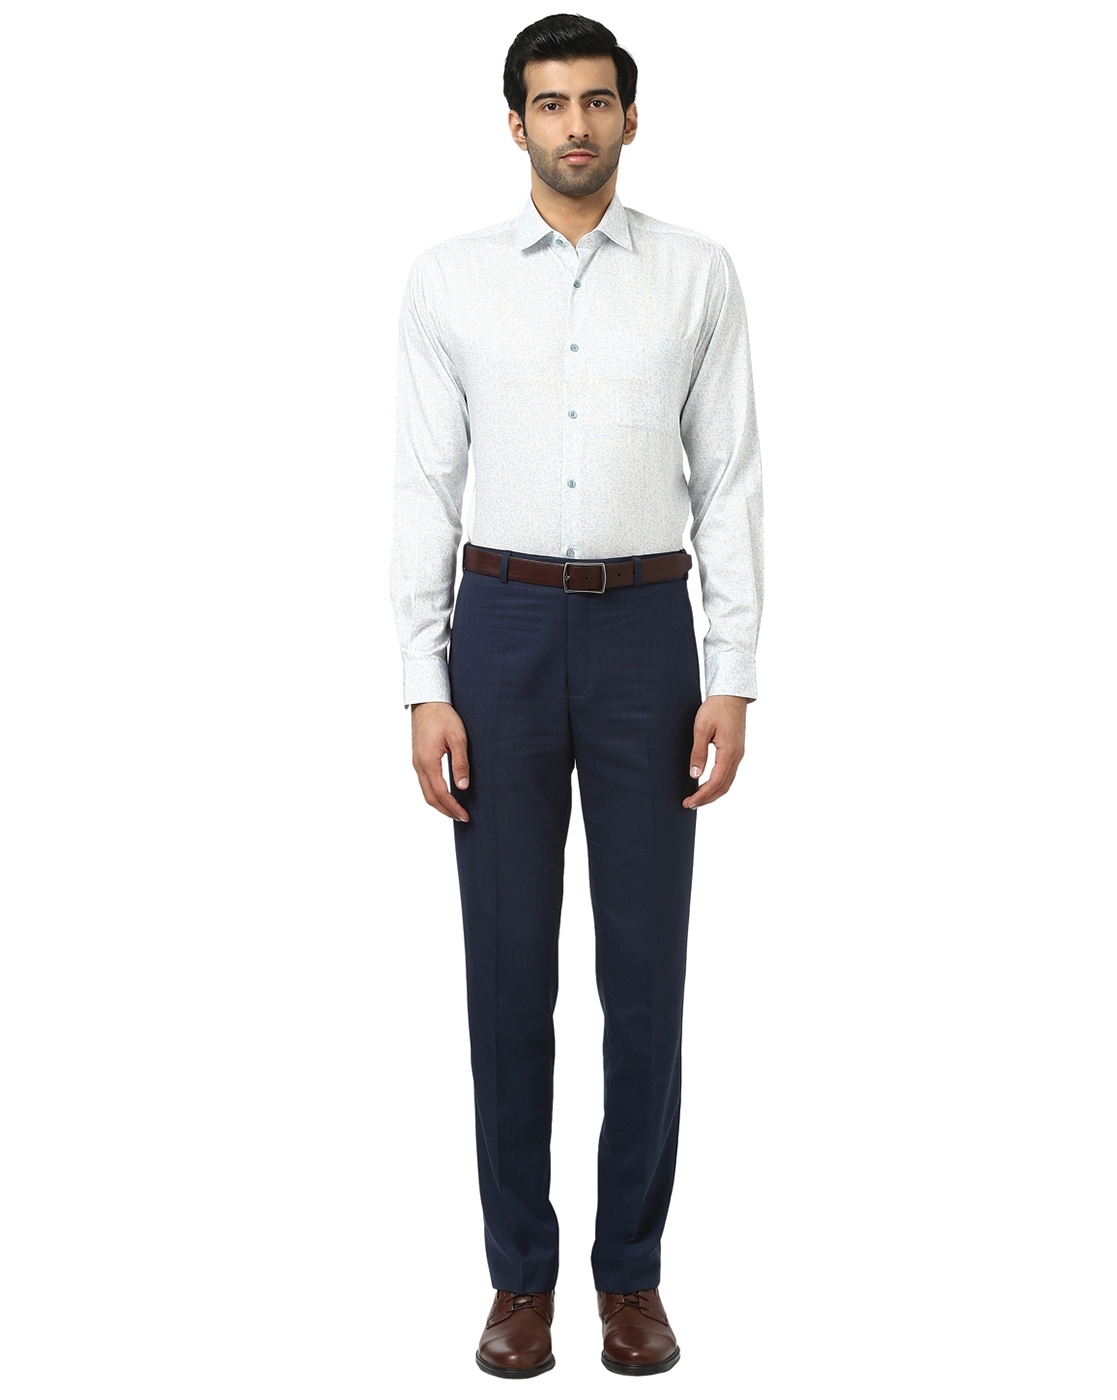 Cropped trousers with double belt loops  Massimo Dutti